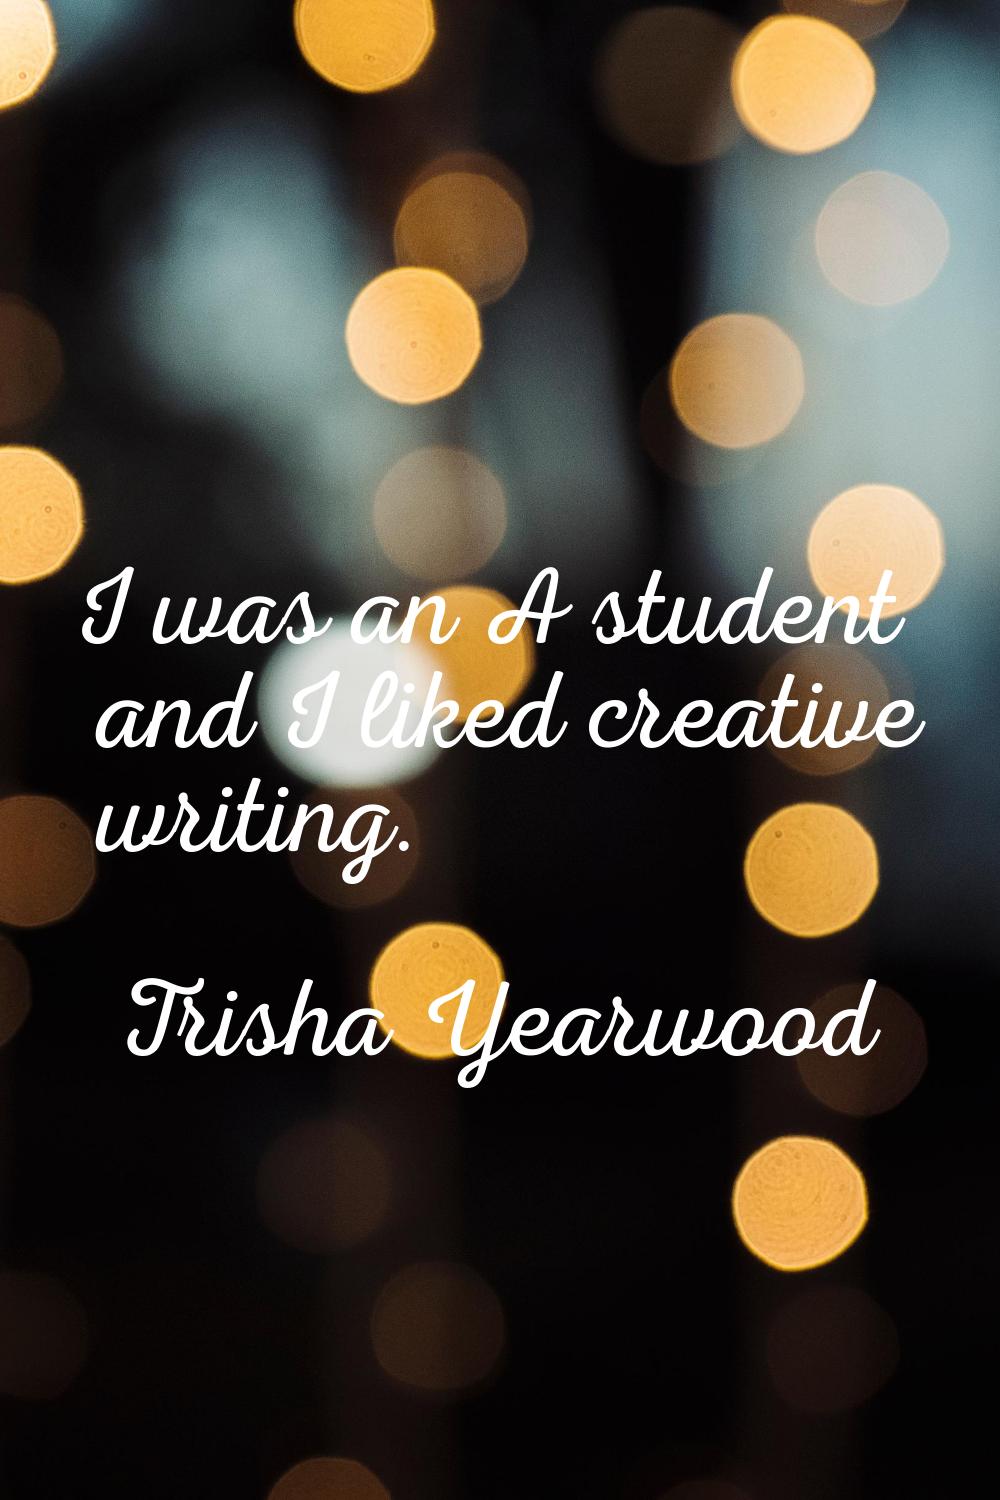 I was an A student and I liked creative writing.